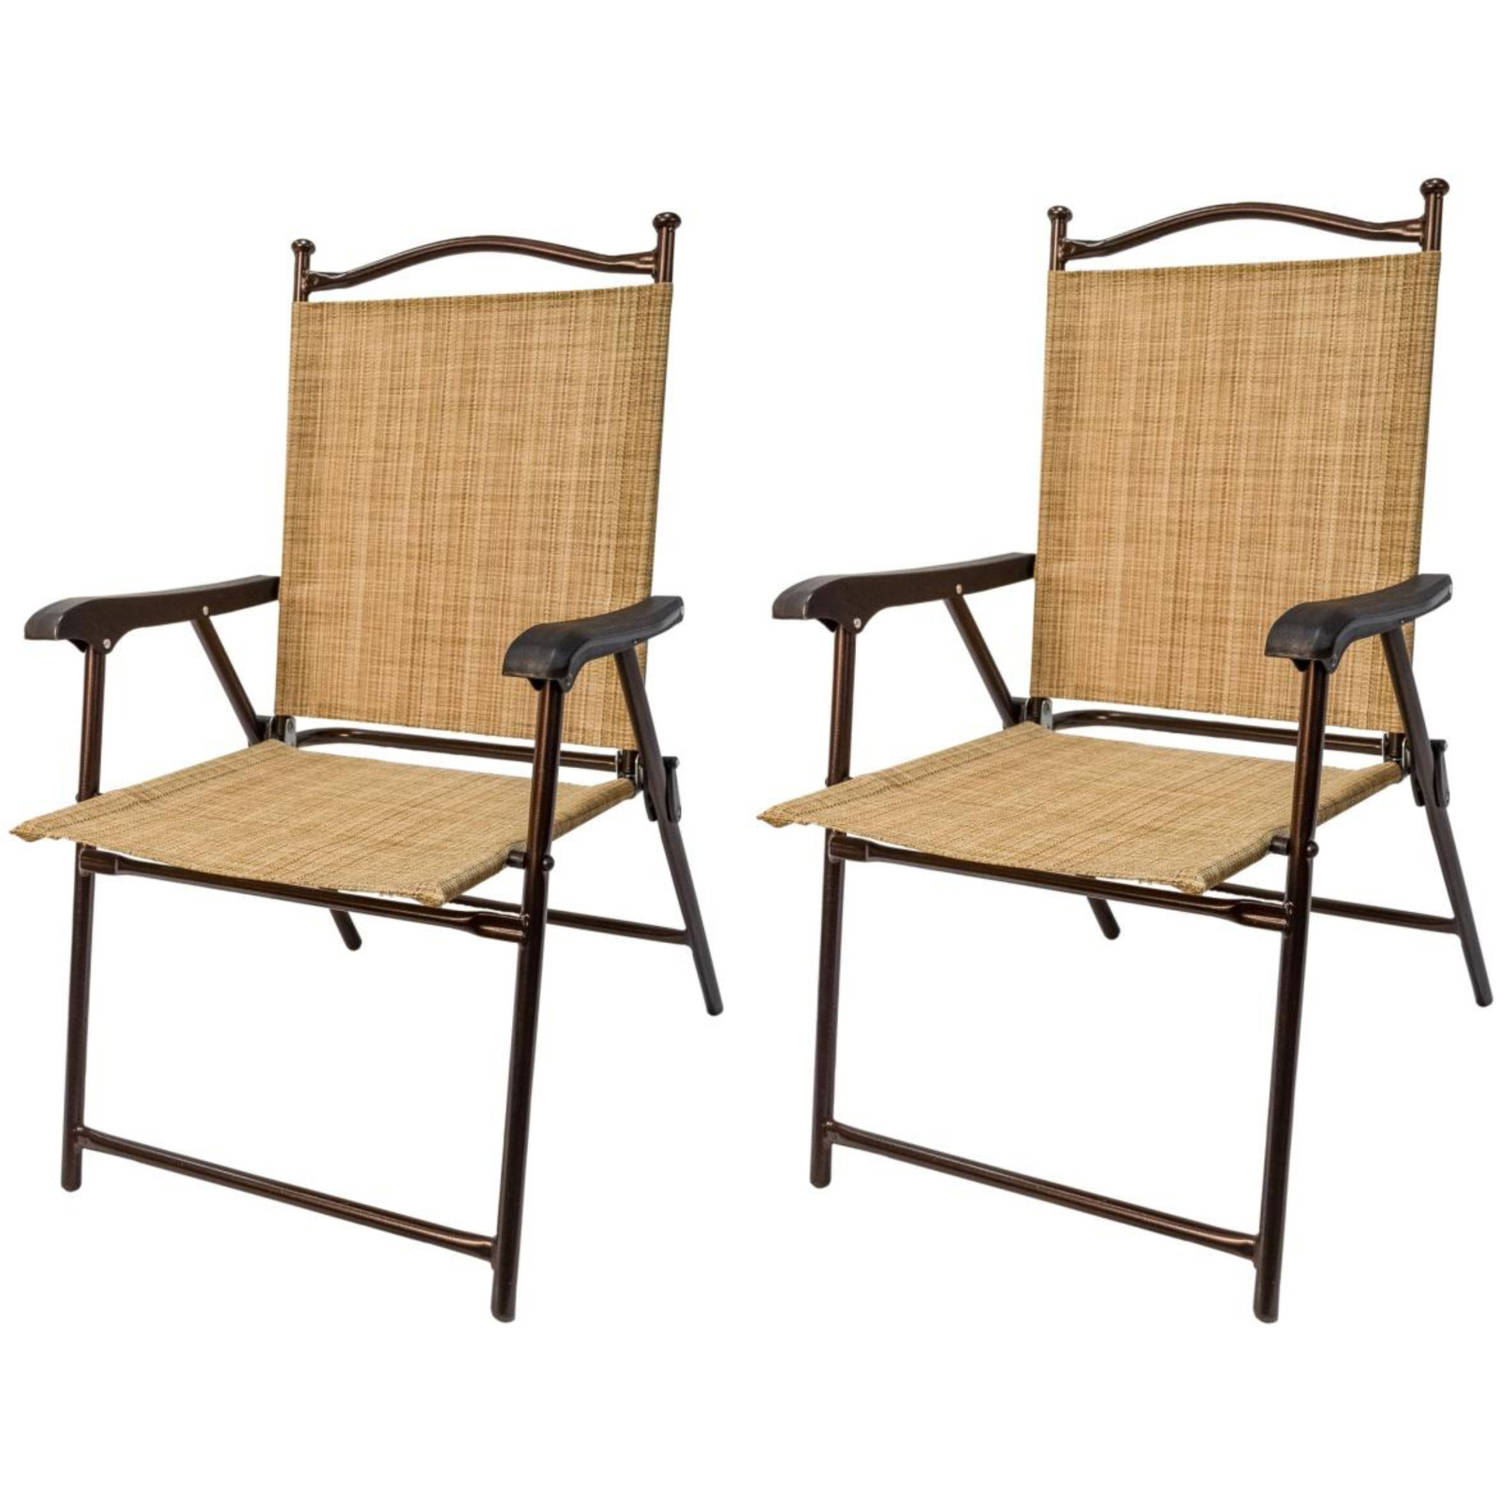 sling black outdoor chairs, bamboo, set of 2 OXXEXXN